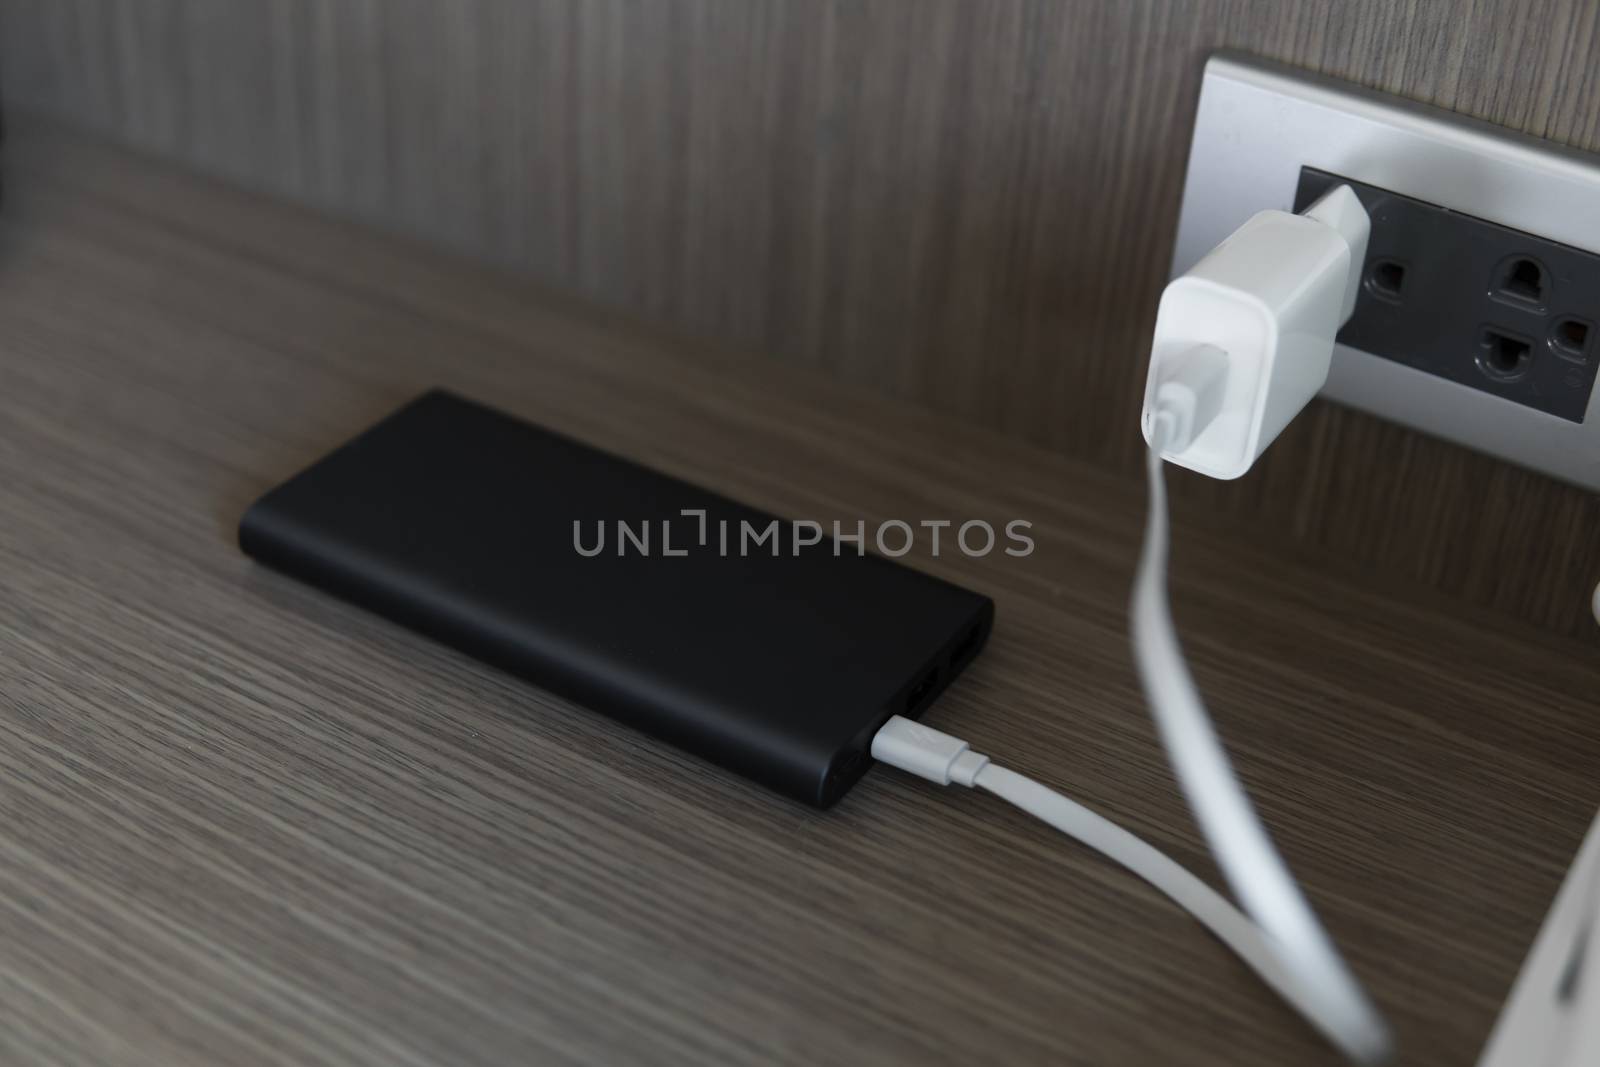 Charging of power bank. Power-saving device for smartphone and other devices. Helping to charge your phone